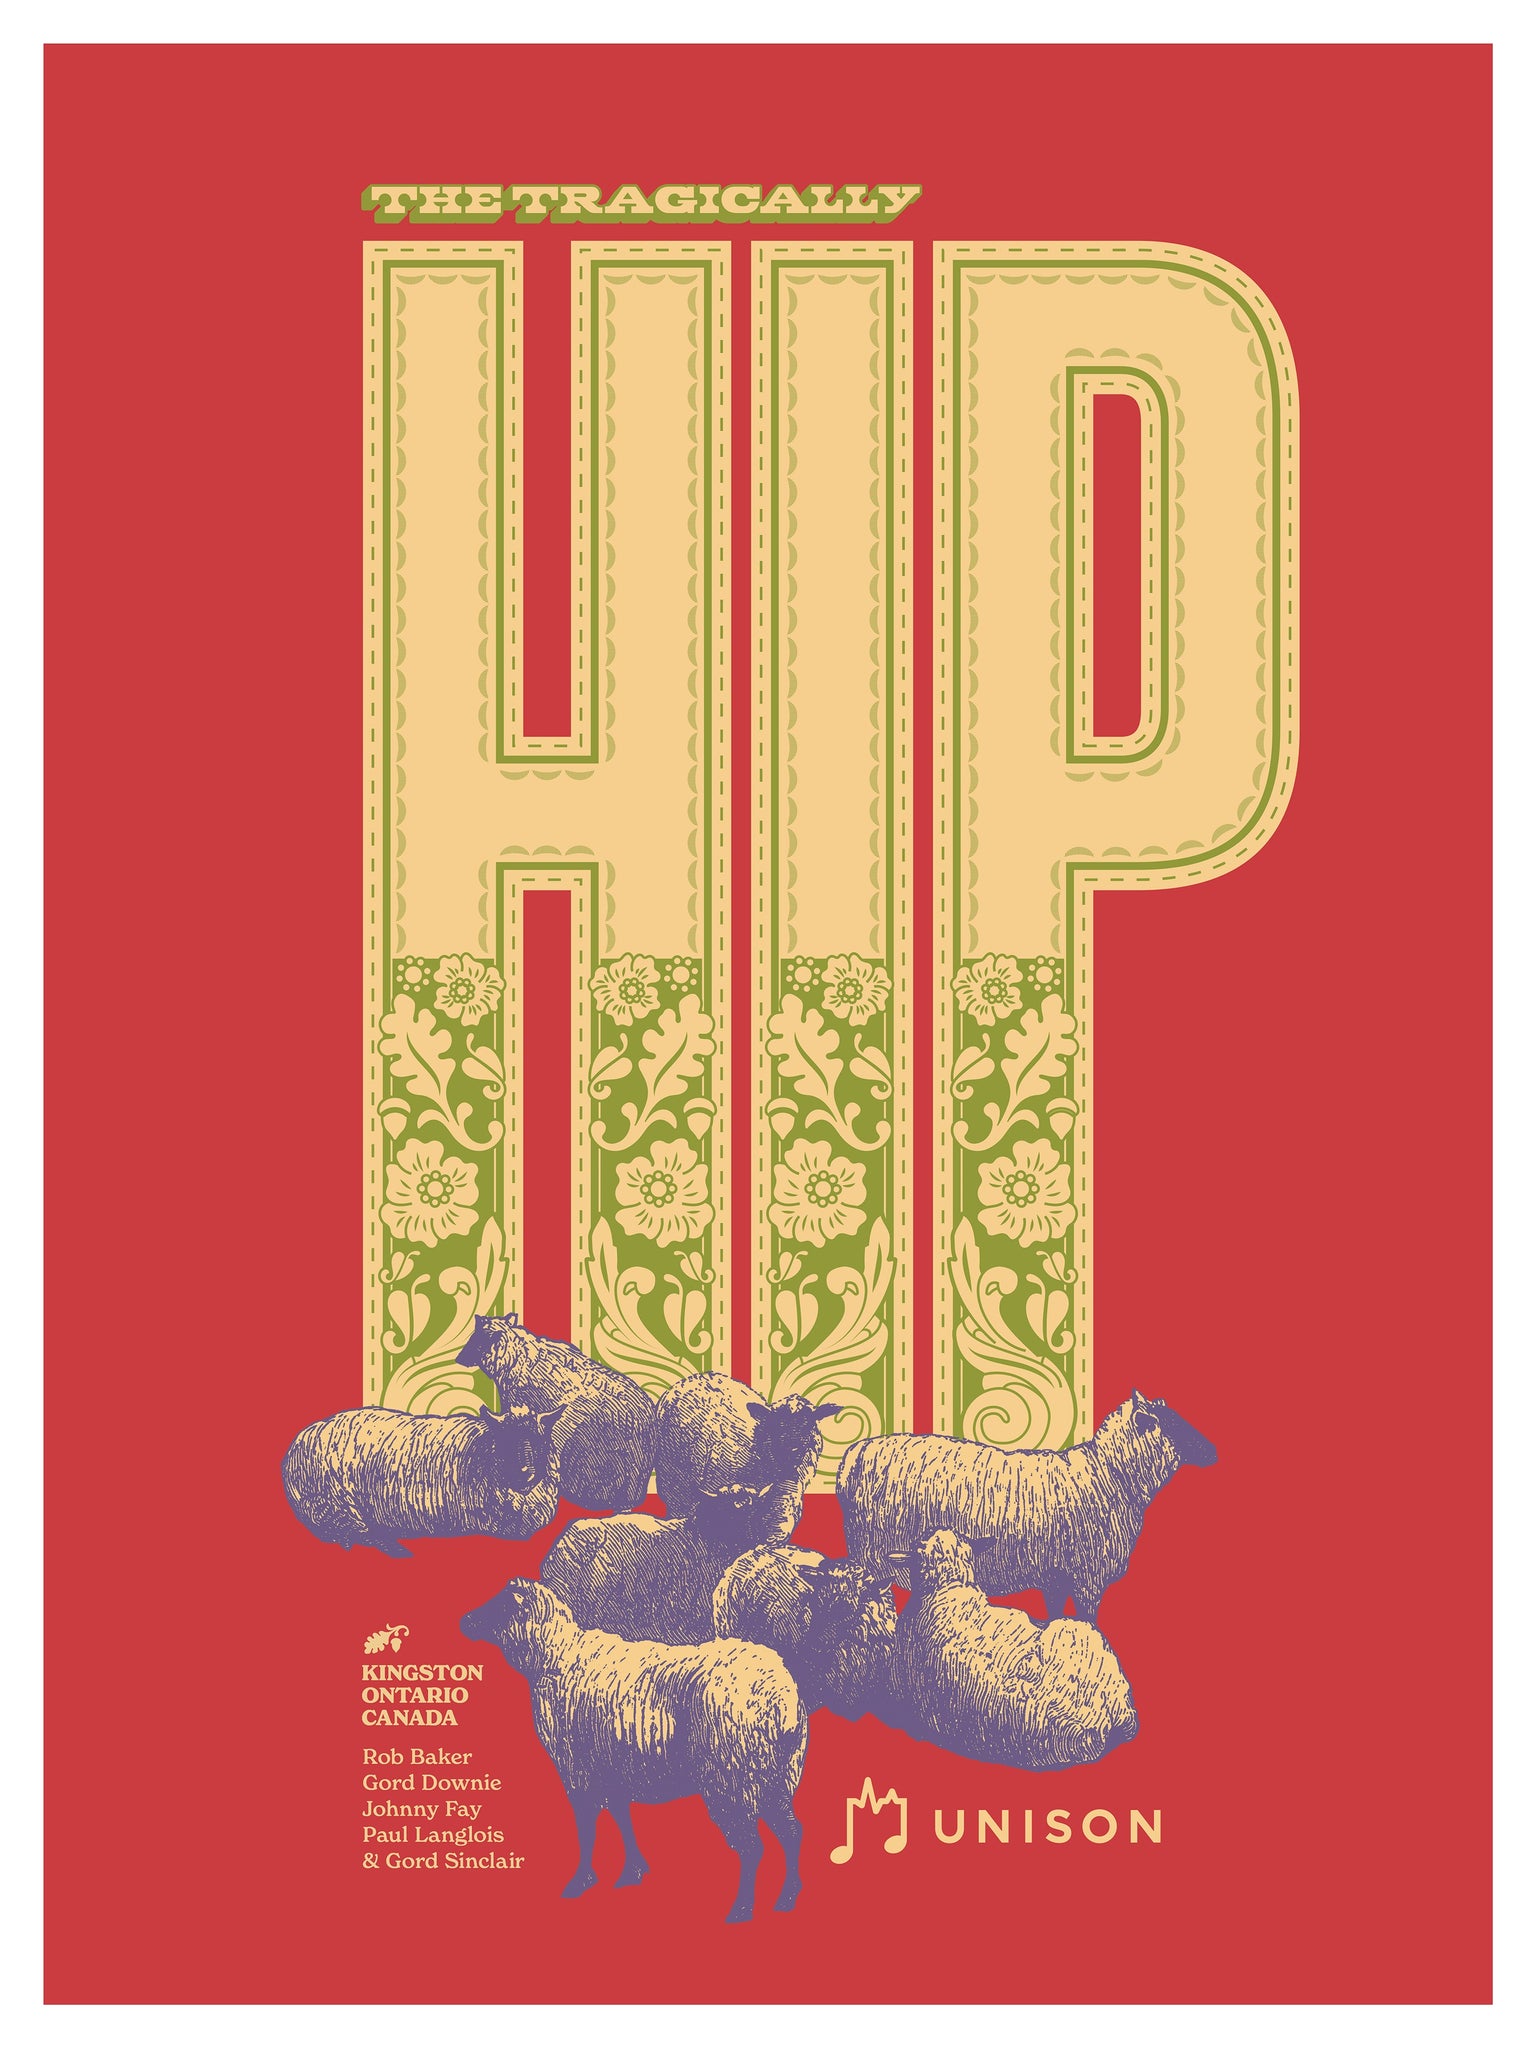 The Unison Fund Charity Holiday Poster designed by Erik M. Grice